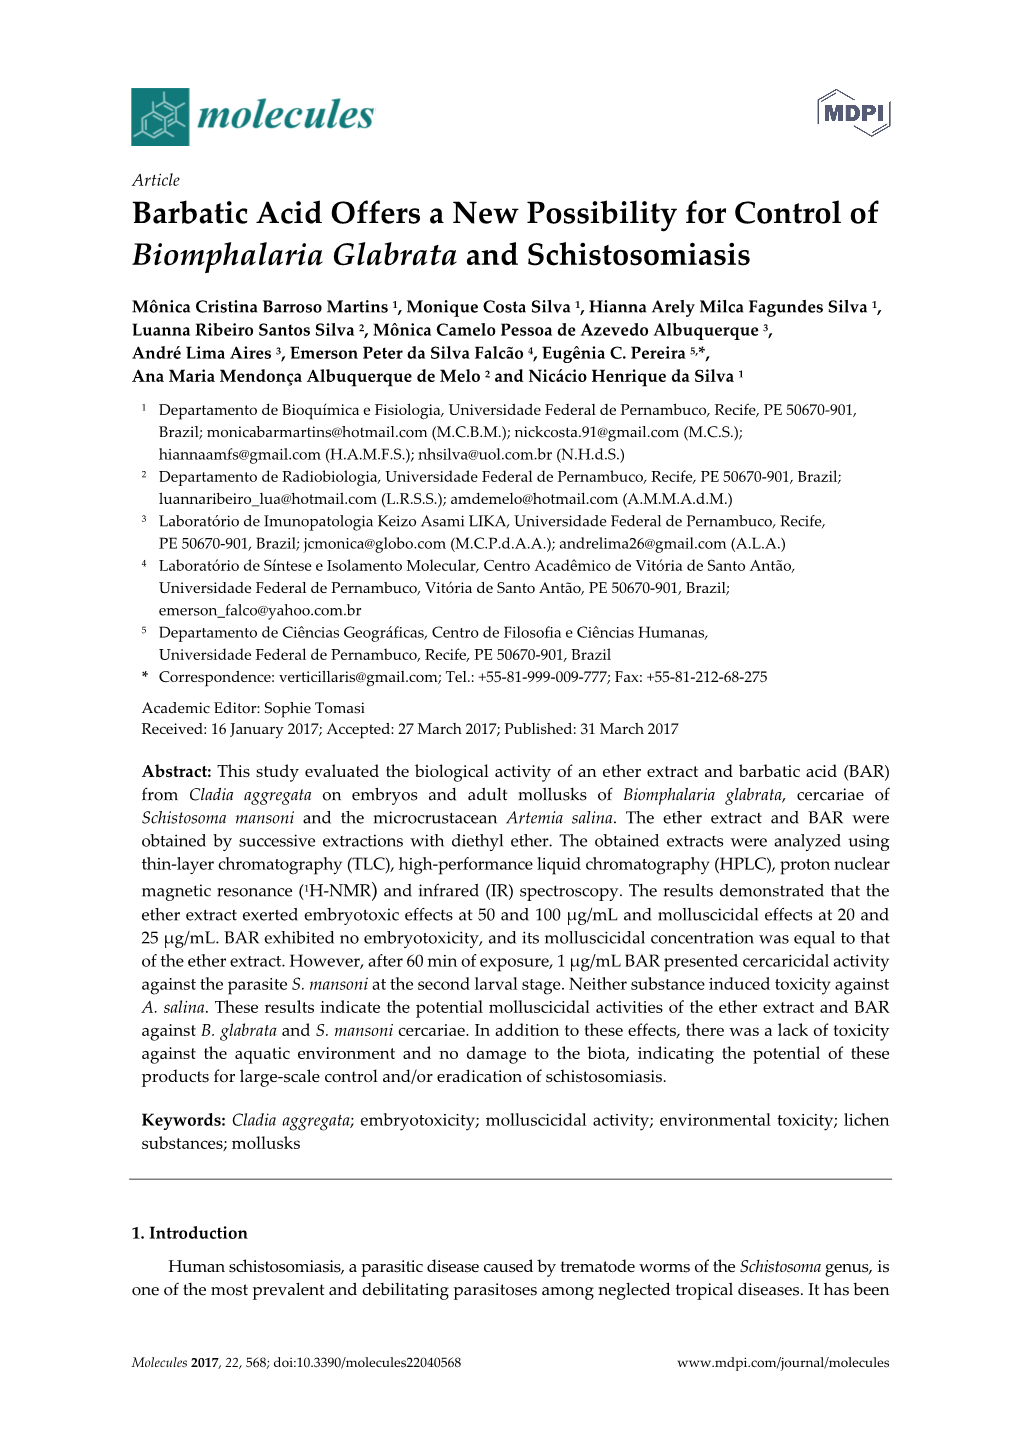 Barbatic Acid Offers a New Possibility for Control of Biomphalaria Glabrata and Schistosomiasis